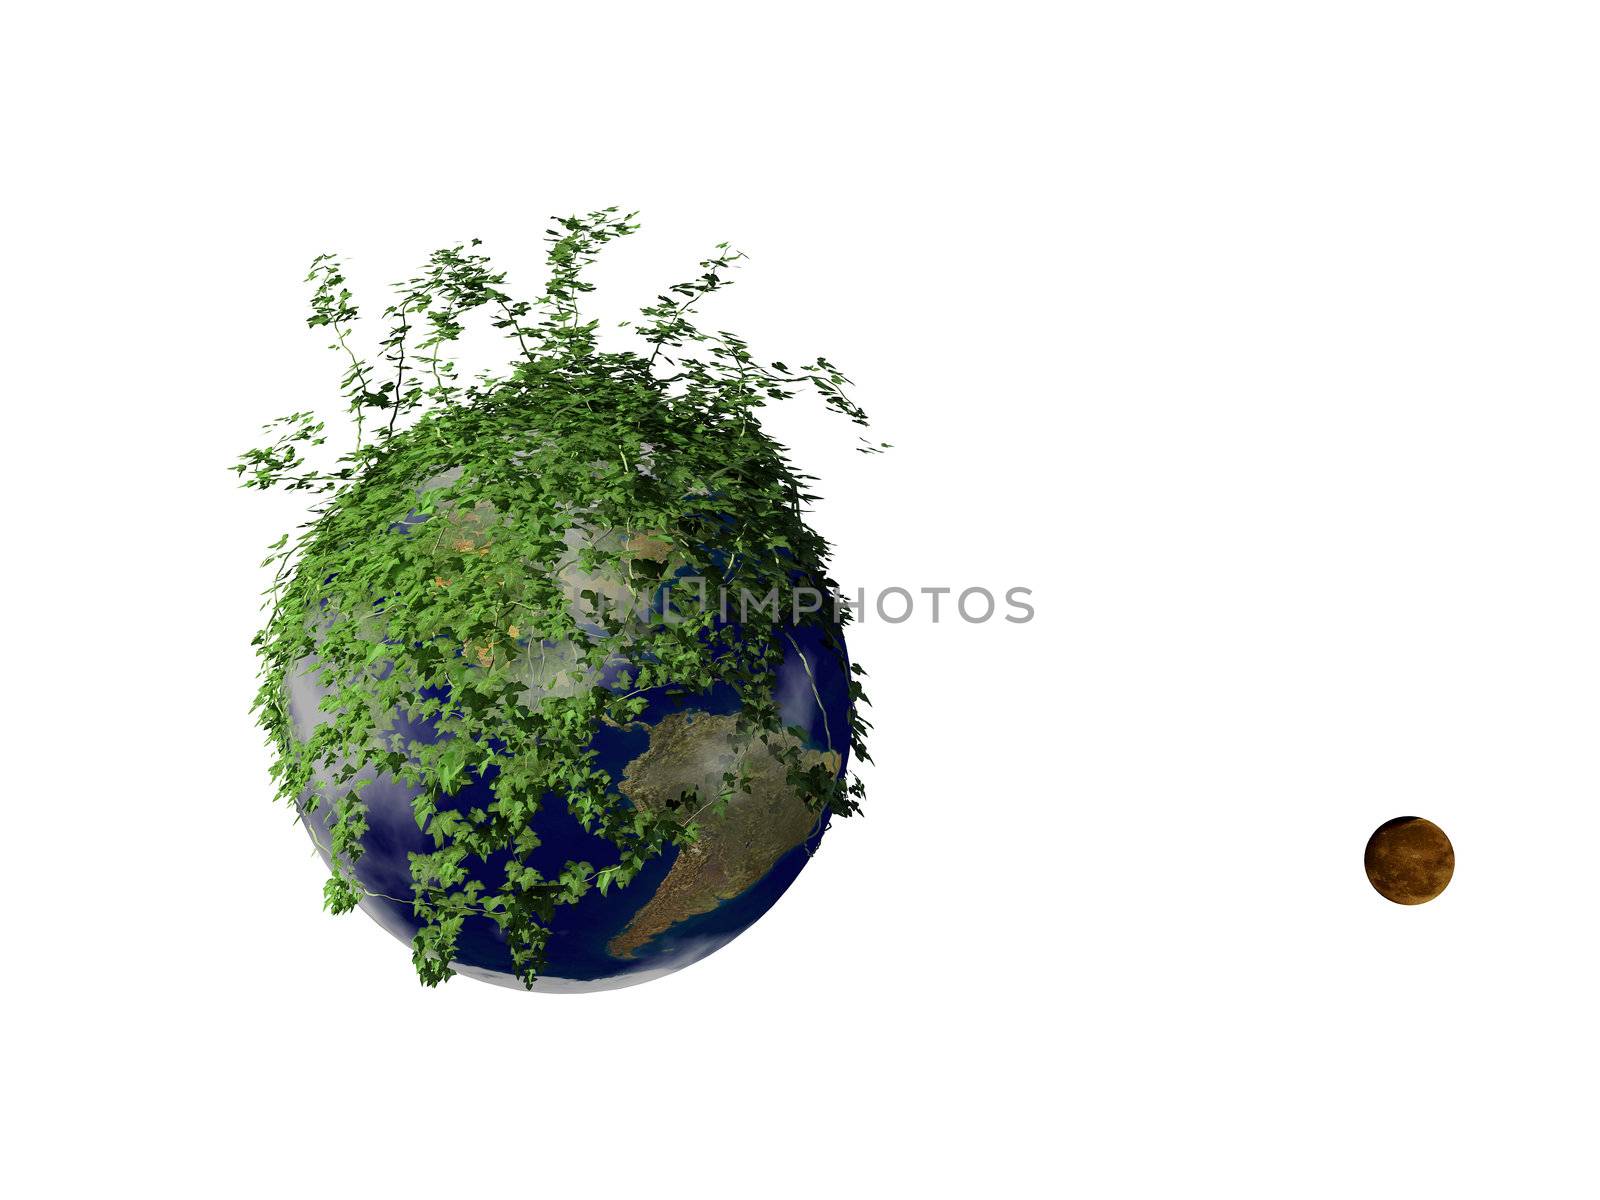 eath planet growth by plant with the moon over the white background